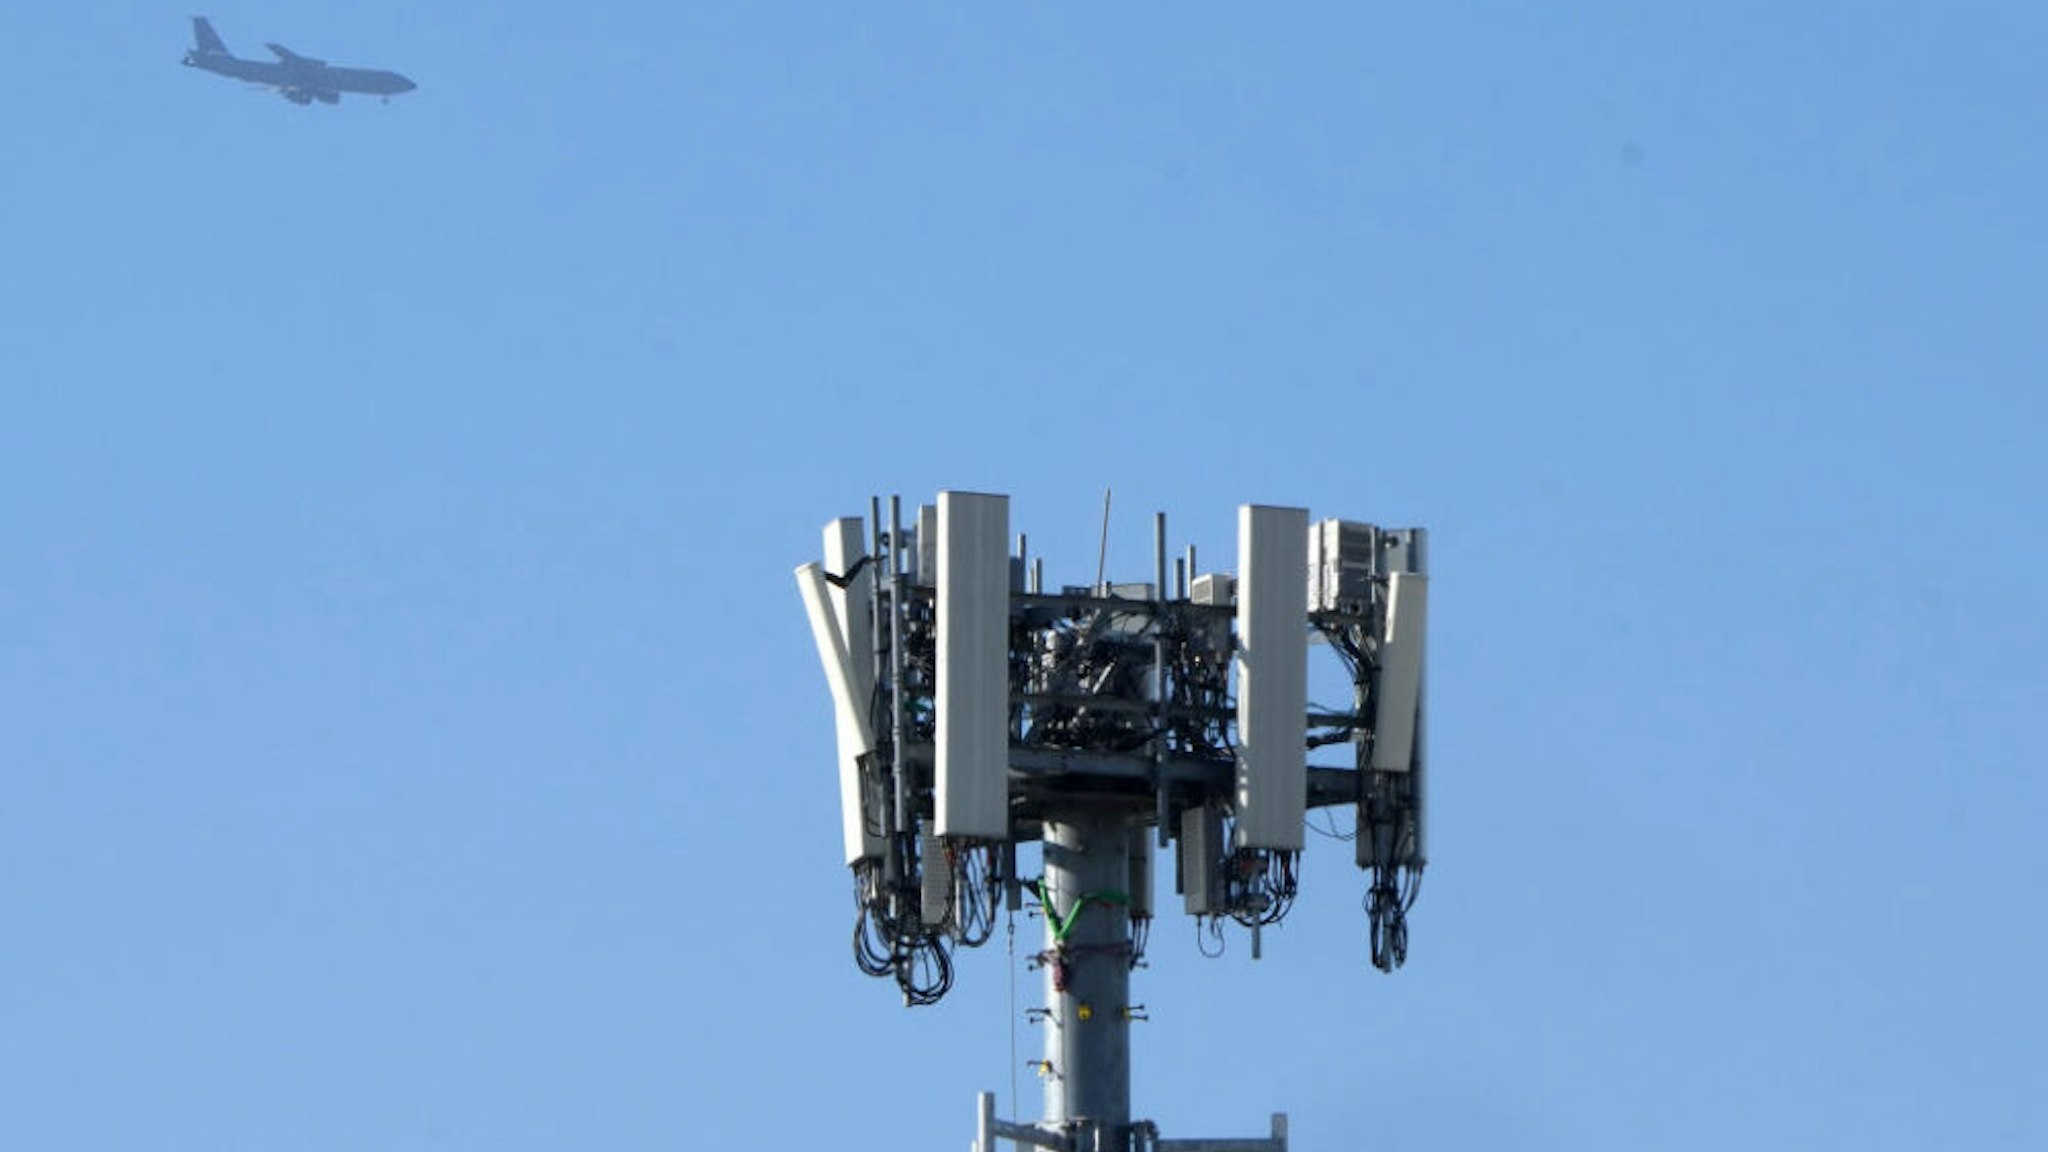 A 5G cell tower in Salt Lake City, Utah, U.S., on Tuesday, Jan. 11, 2022. A long-simmering dispute over promising new wireless technology burst into public view in the past week and threatened to further disrupt U.S. air travel already hobbled by the new omicron Covid variant.